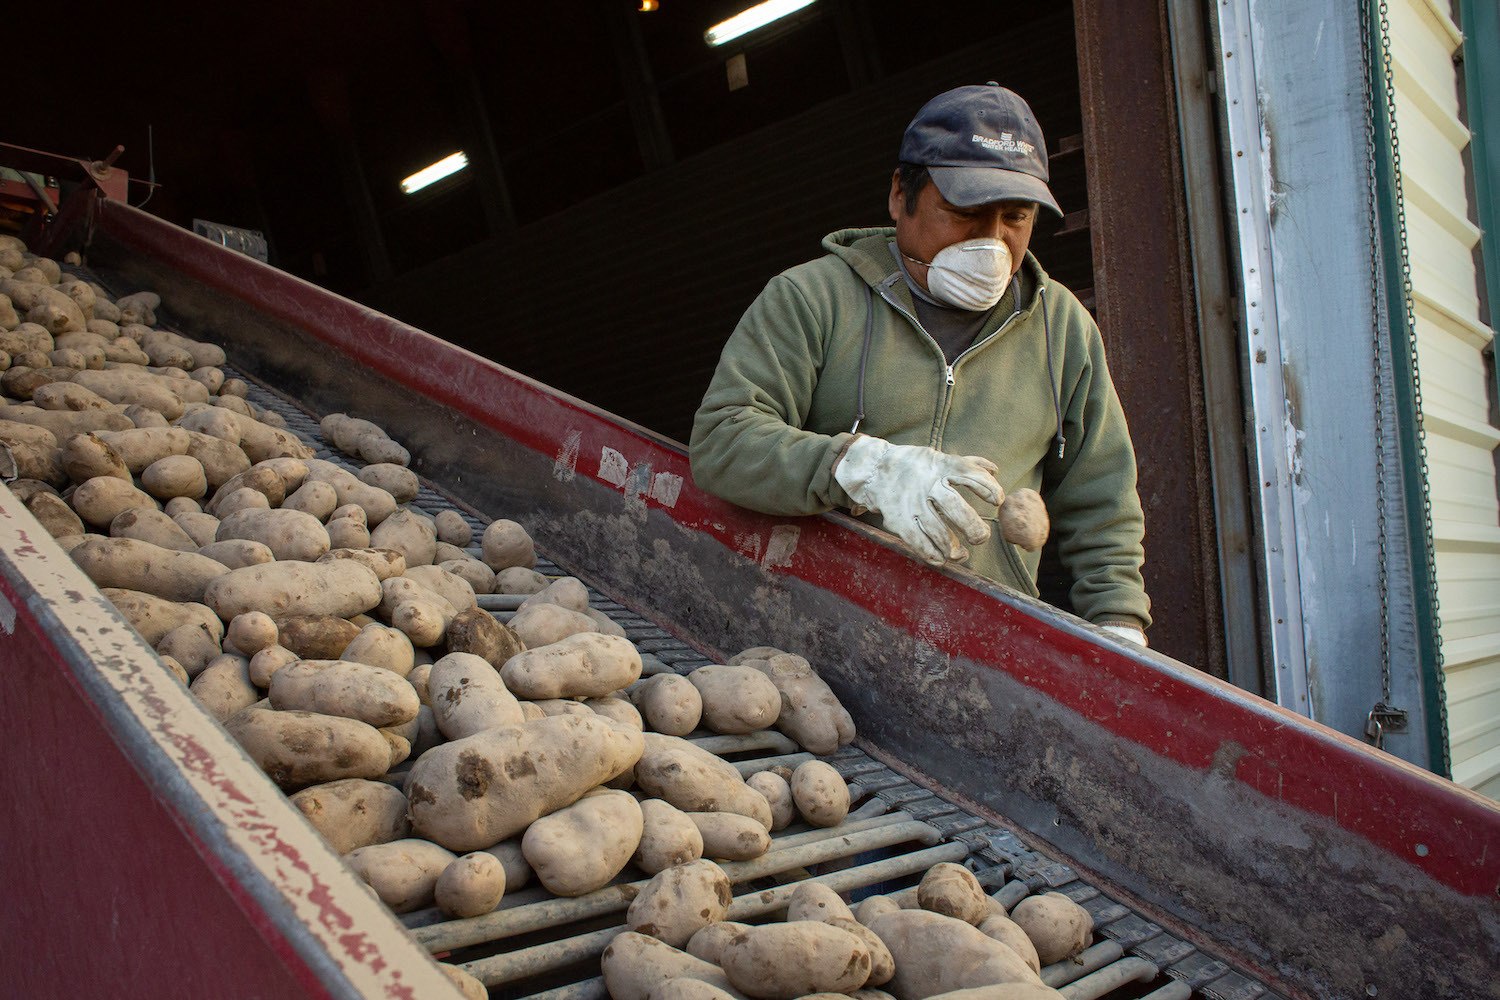 A worker removes unusable Russet Burbank potatoes as they are transferred into a storage facility operated by local grower Frank Martinez of Saddle View Farms on May 1, 2020 in Warden, Washington.